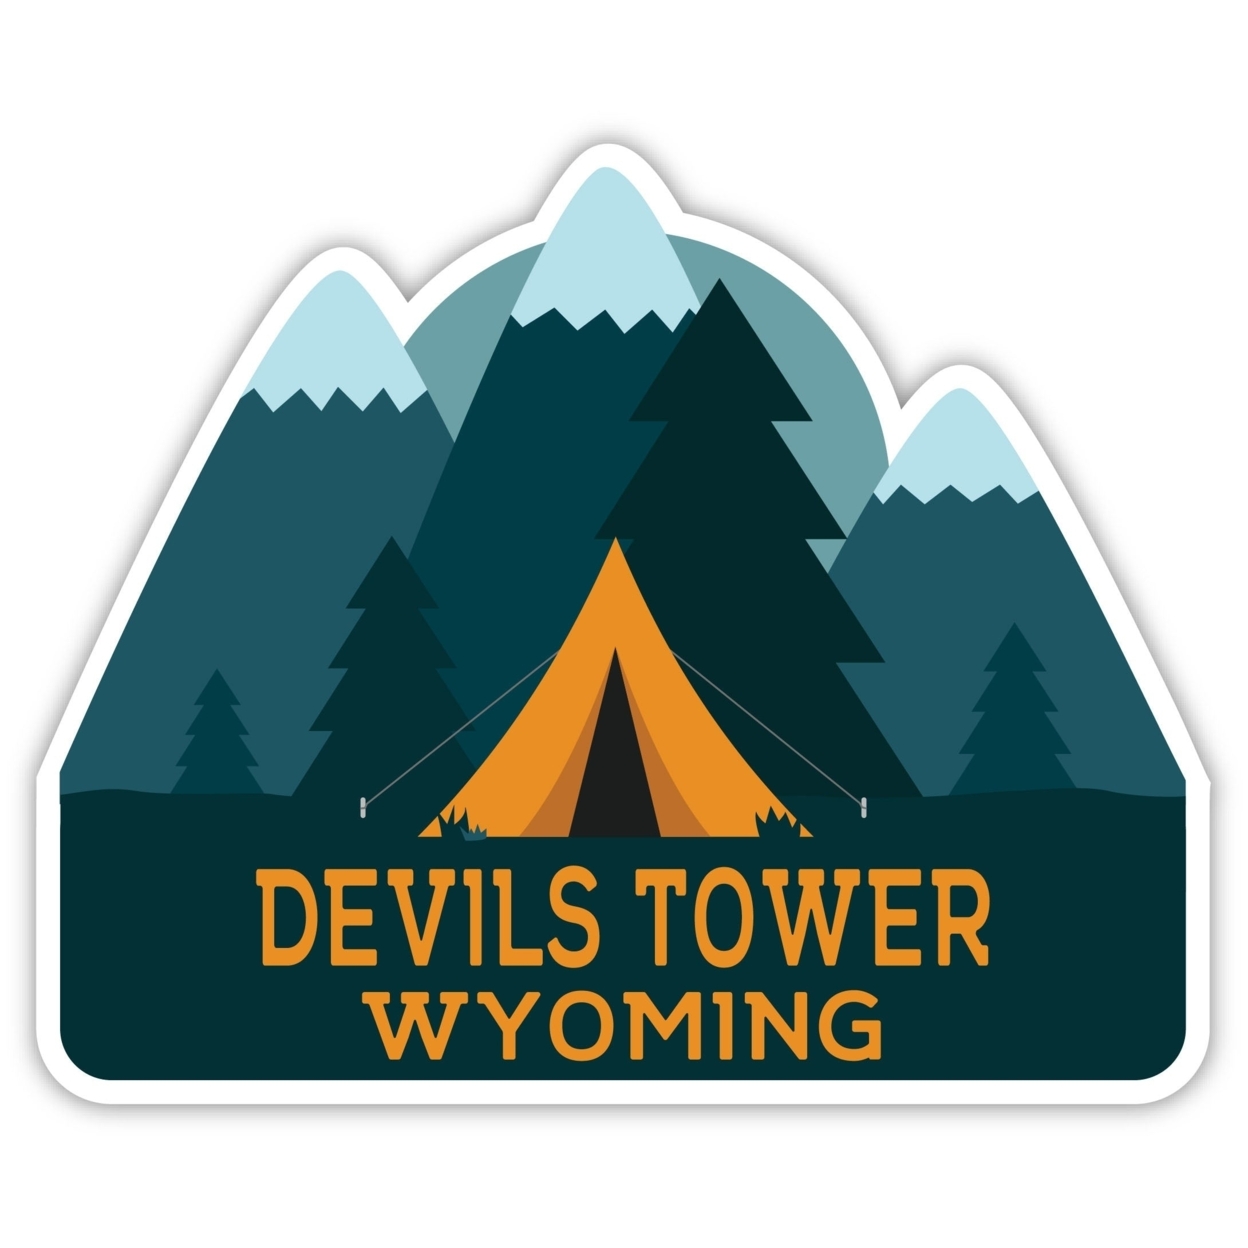 Devils Tower Wyoming Souvenir Decorative Stickers (Choose Theme And Size) - Single Unit, 6-Inch, Tent